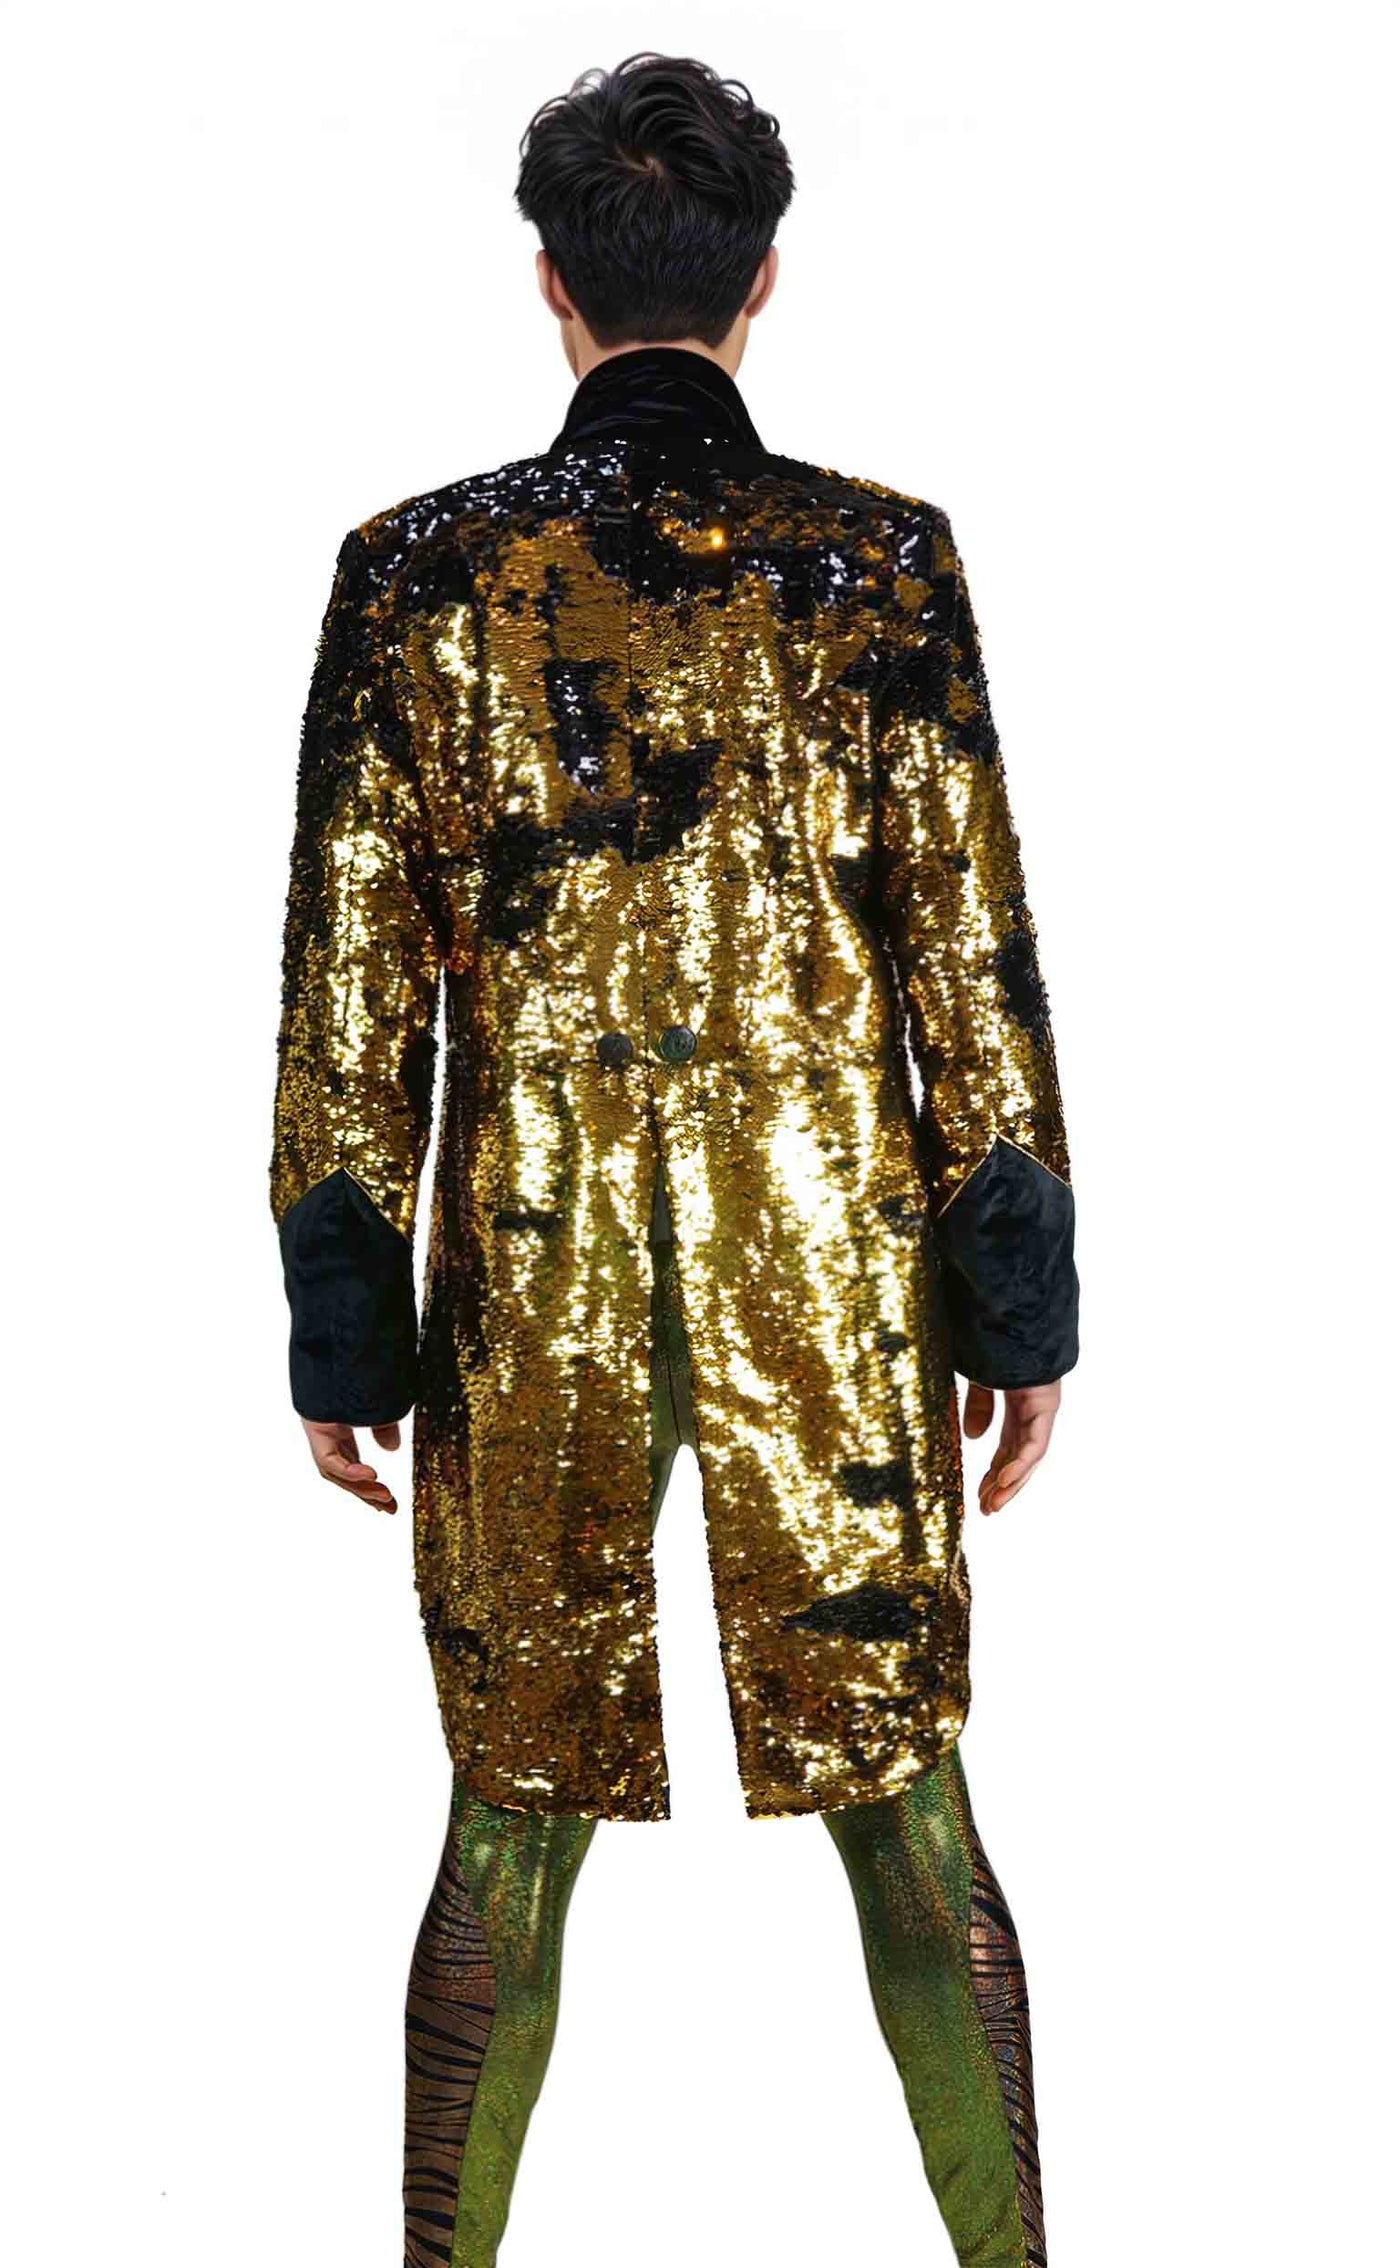 Mens Sequin Tuxedo Jacket with black and gold sequins by Love Khaos